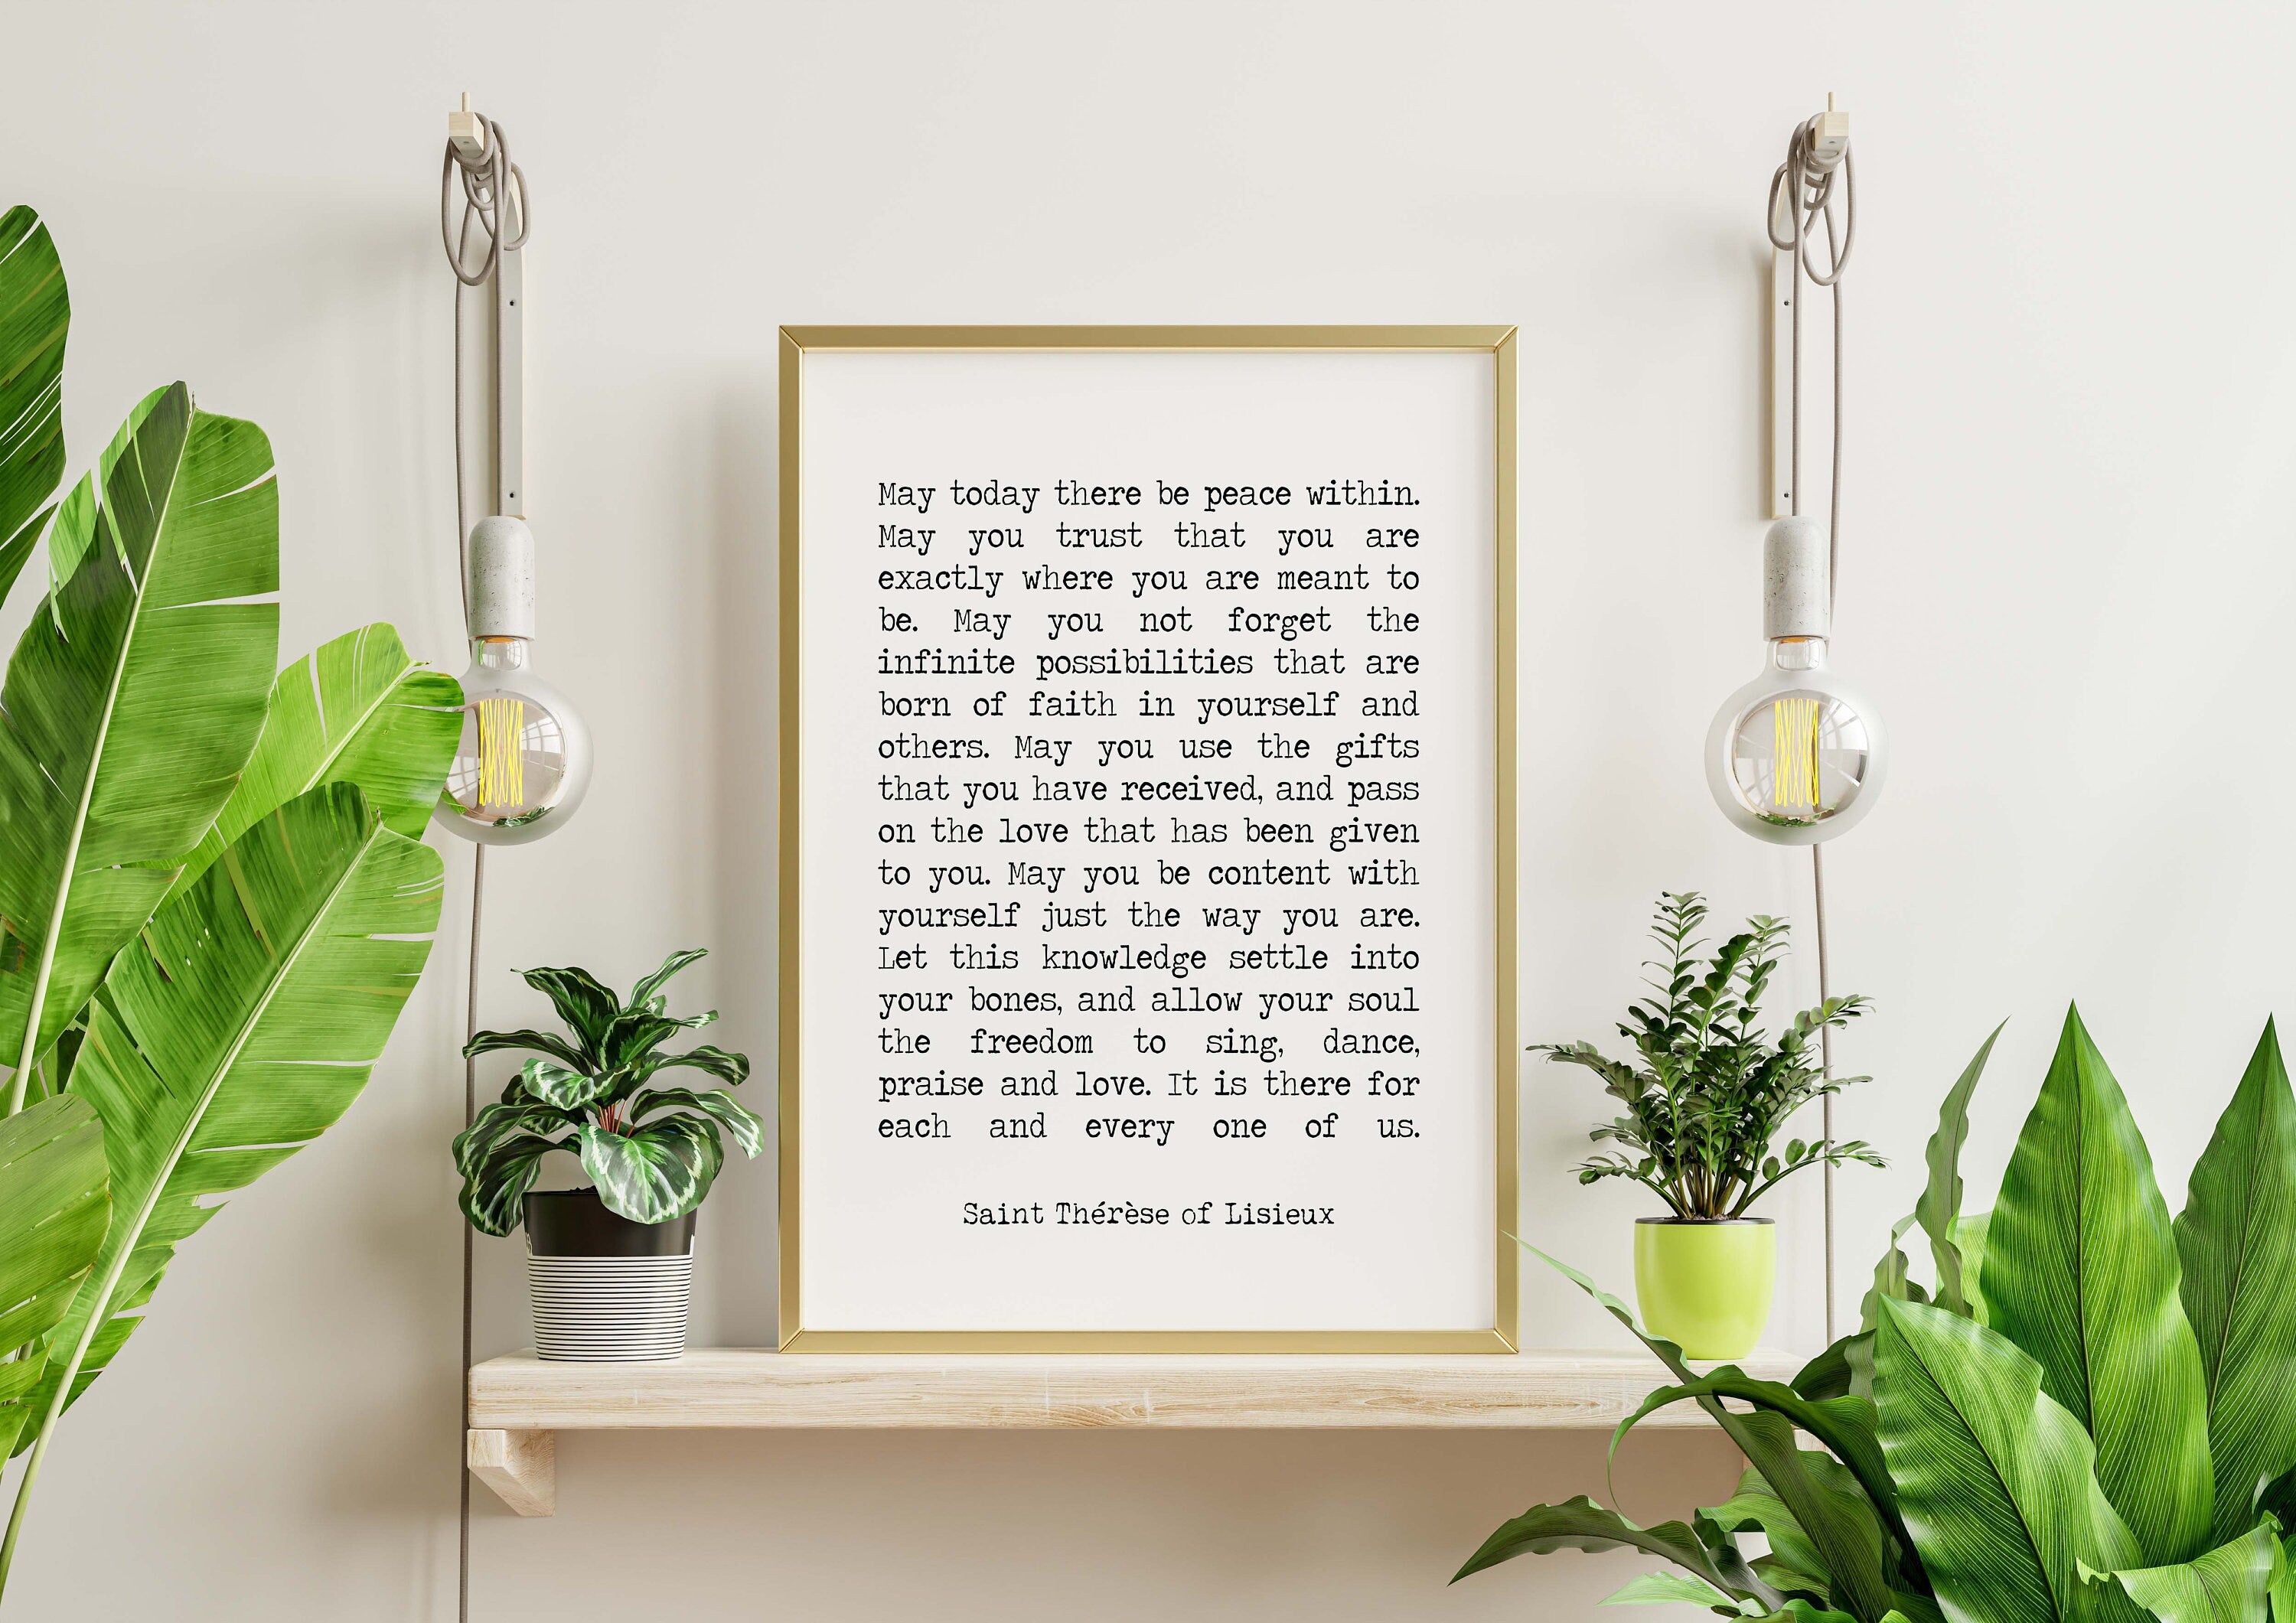 St Therese of Lisieux Peace Quote Print in Black & White, May Today There Be Peace Within Unframed Framed Inspirational Quote Wall Art Print